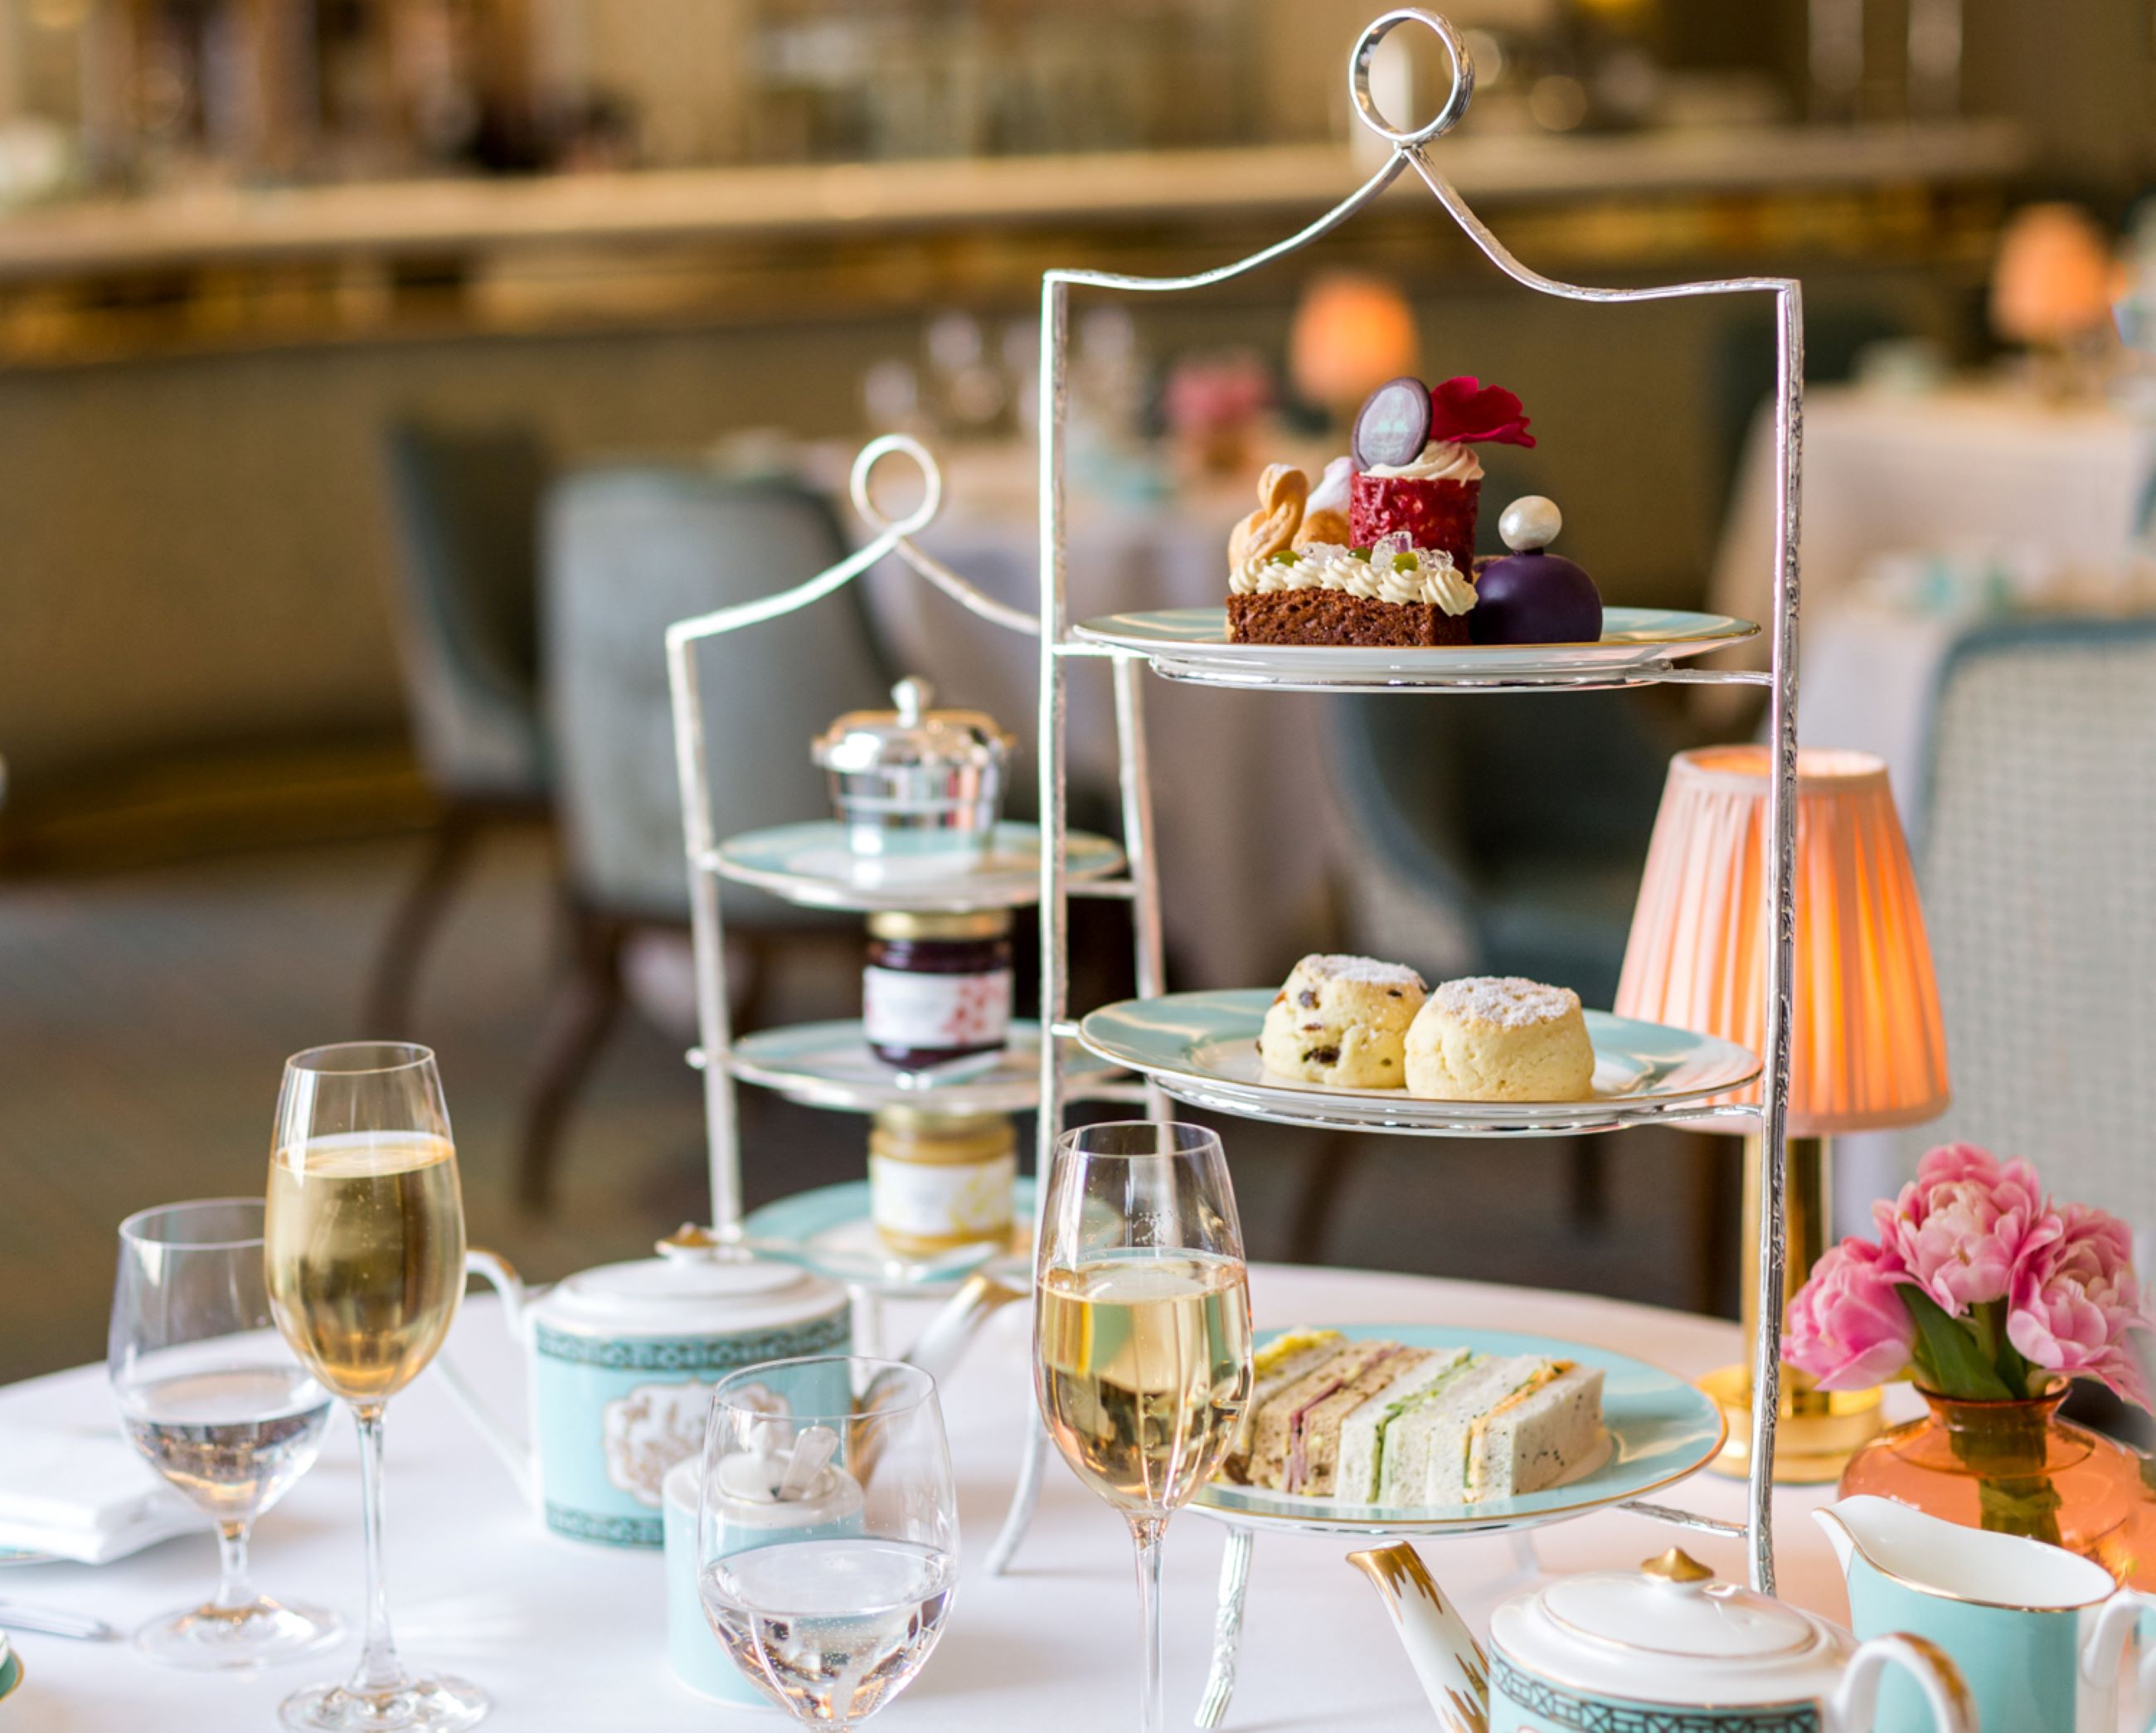 Three-tiered afternoon tea stand with filled champagne glasses at Fortnum and Mason